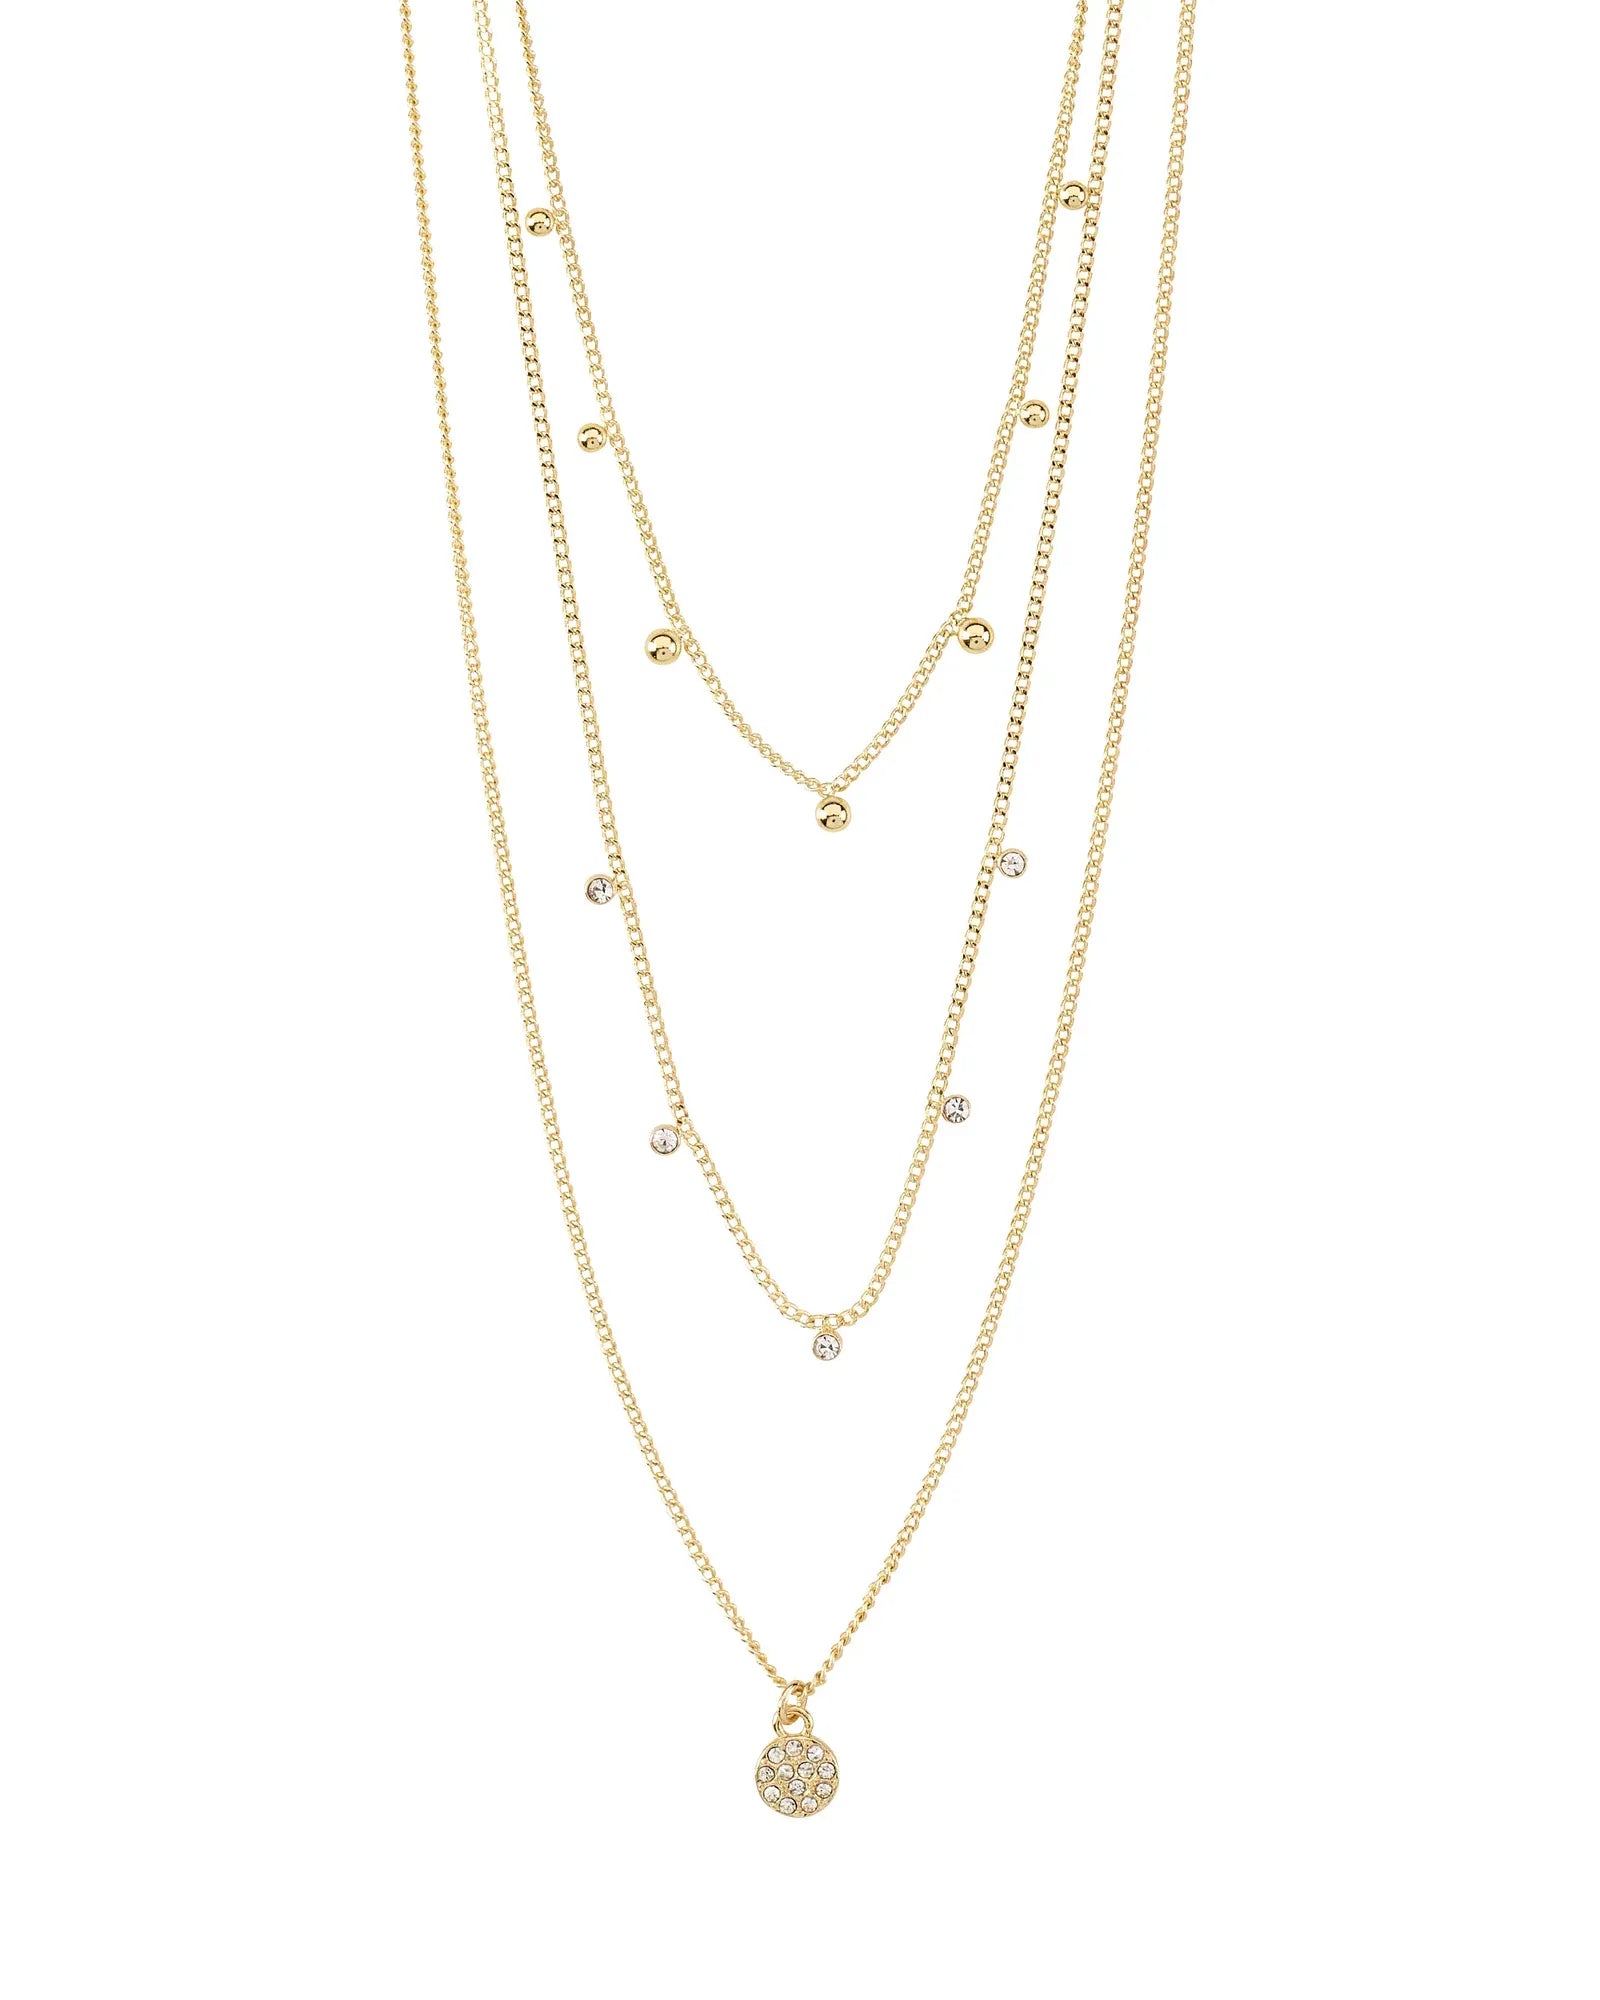 CHAYENNE Recycled Crystal Necklace - Gold Plated